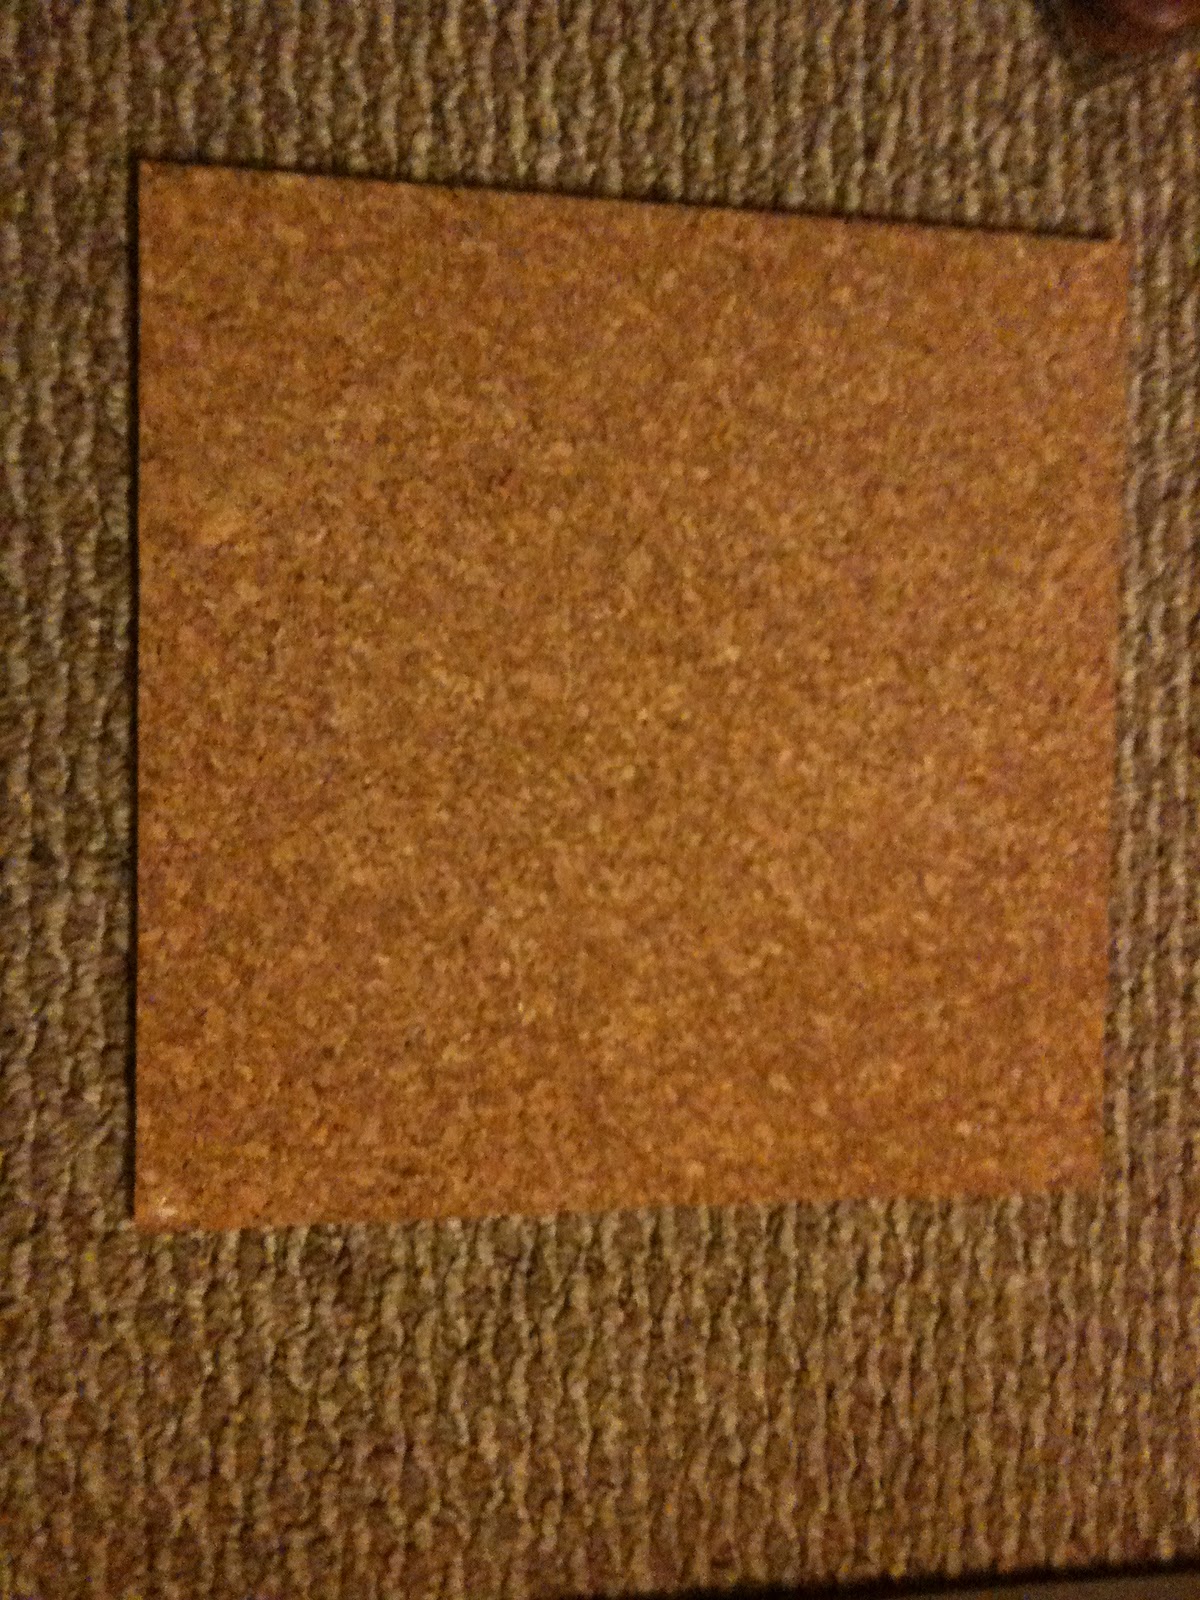 Start out with four cork board squares. I got mine at Hobby Lobby for ...